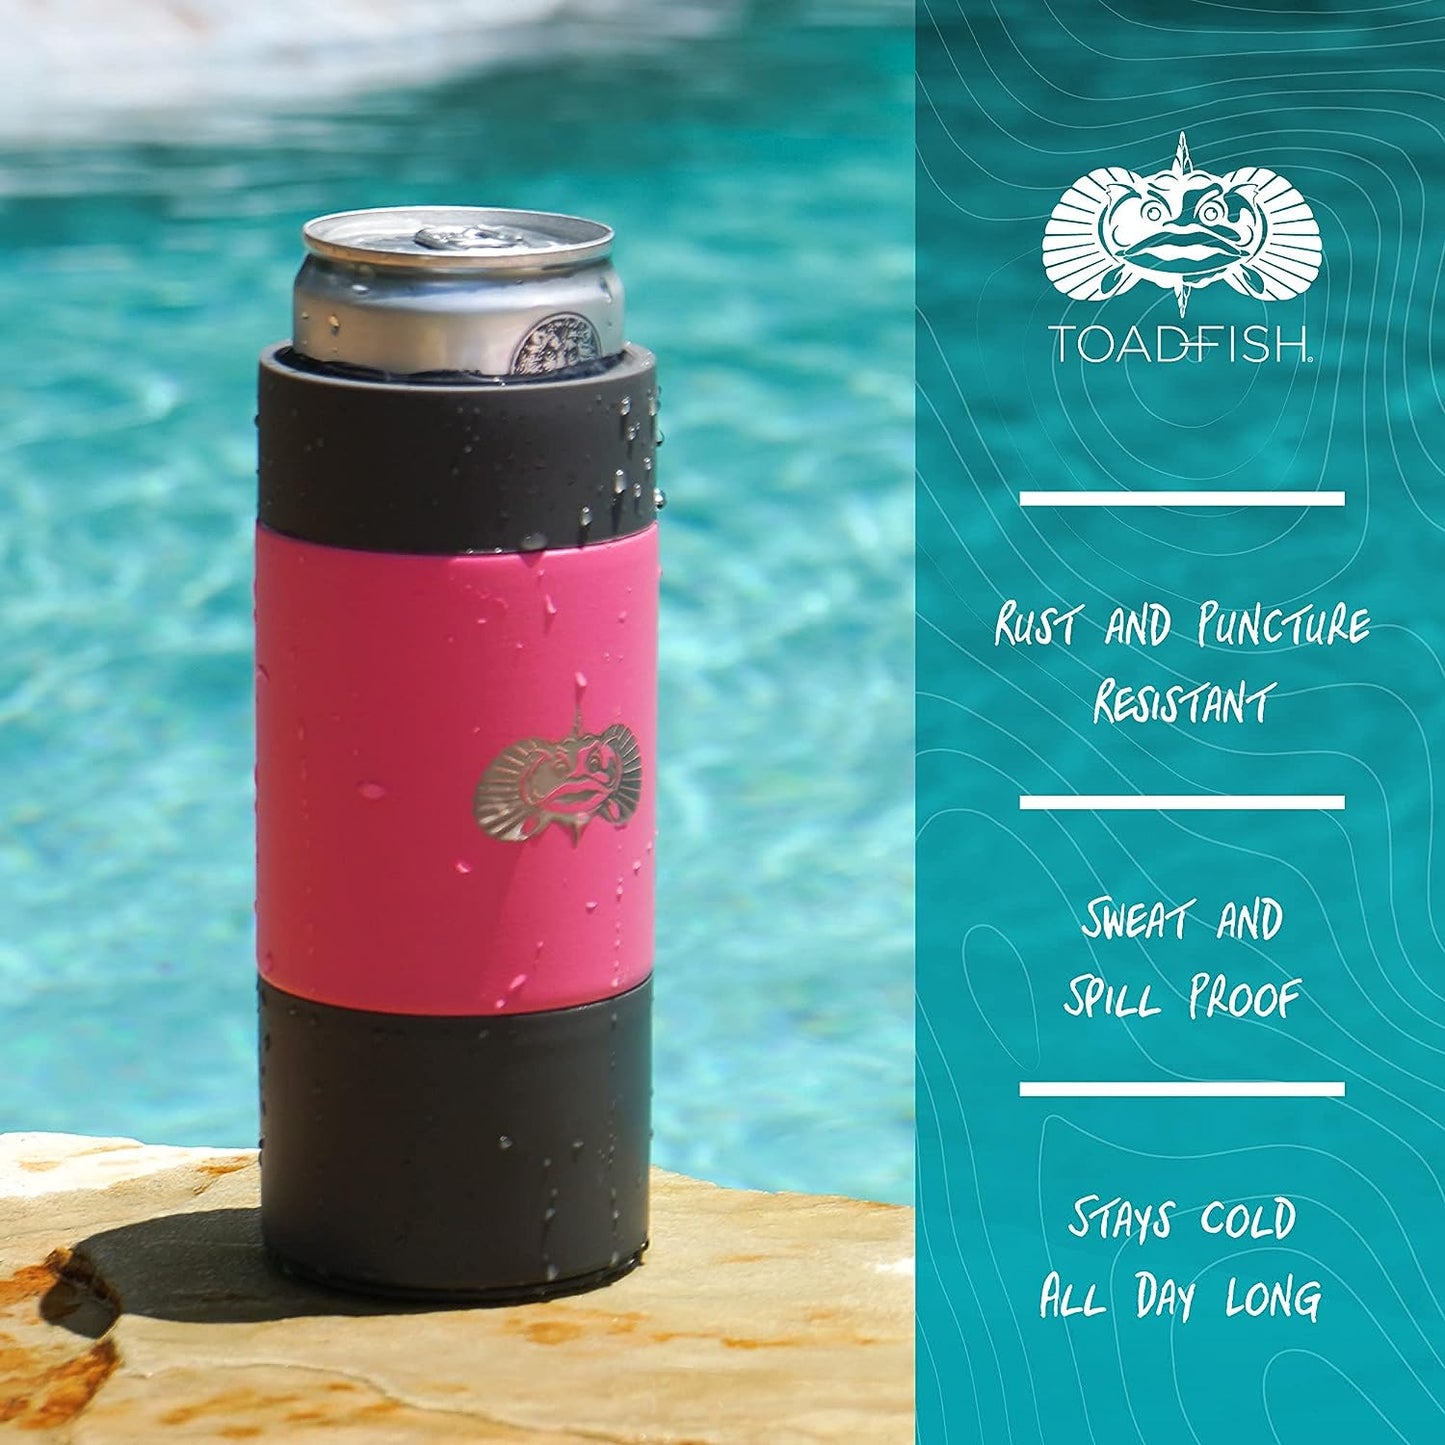 Toadfish Slim Non-Tipping Can Cooler for 12oz Cans - Suction Cup Cooler For Beer & Soda - Stainless Steel Double-Wall Vacuum Insulated Cooler - Sturdy Beverage Holder - 2-Pack (Pink)